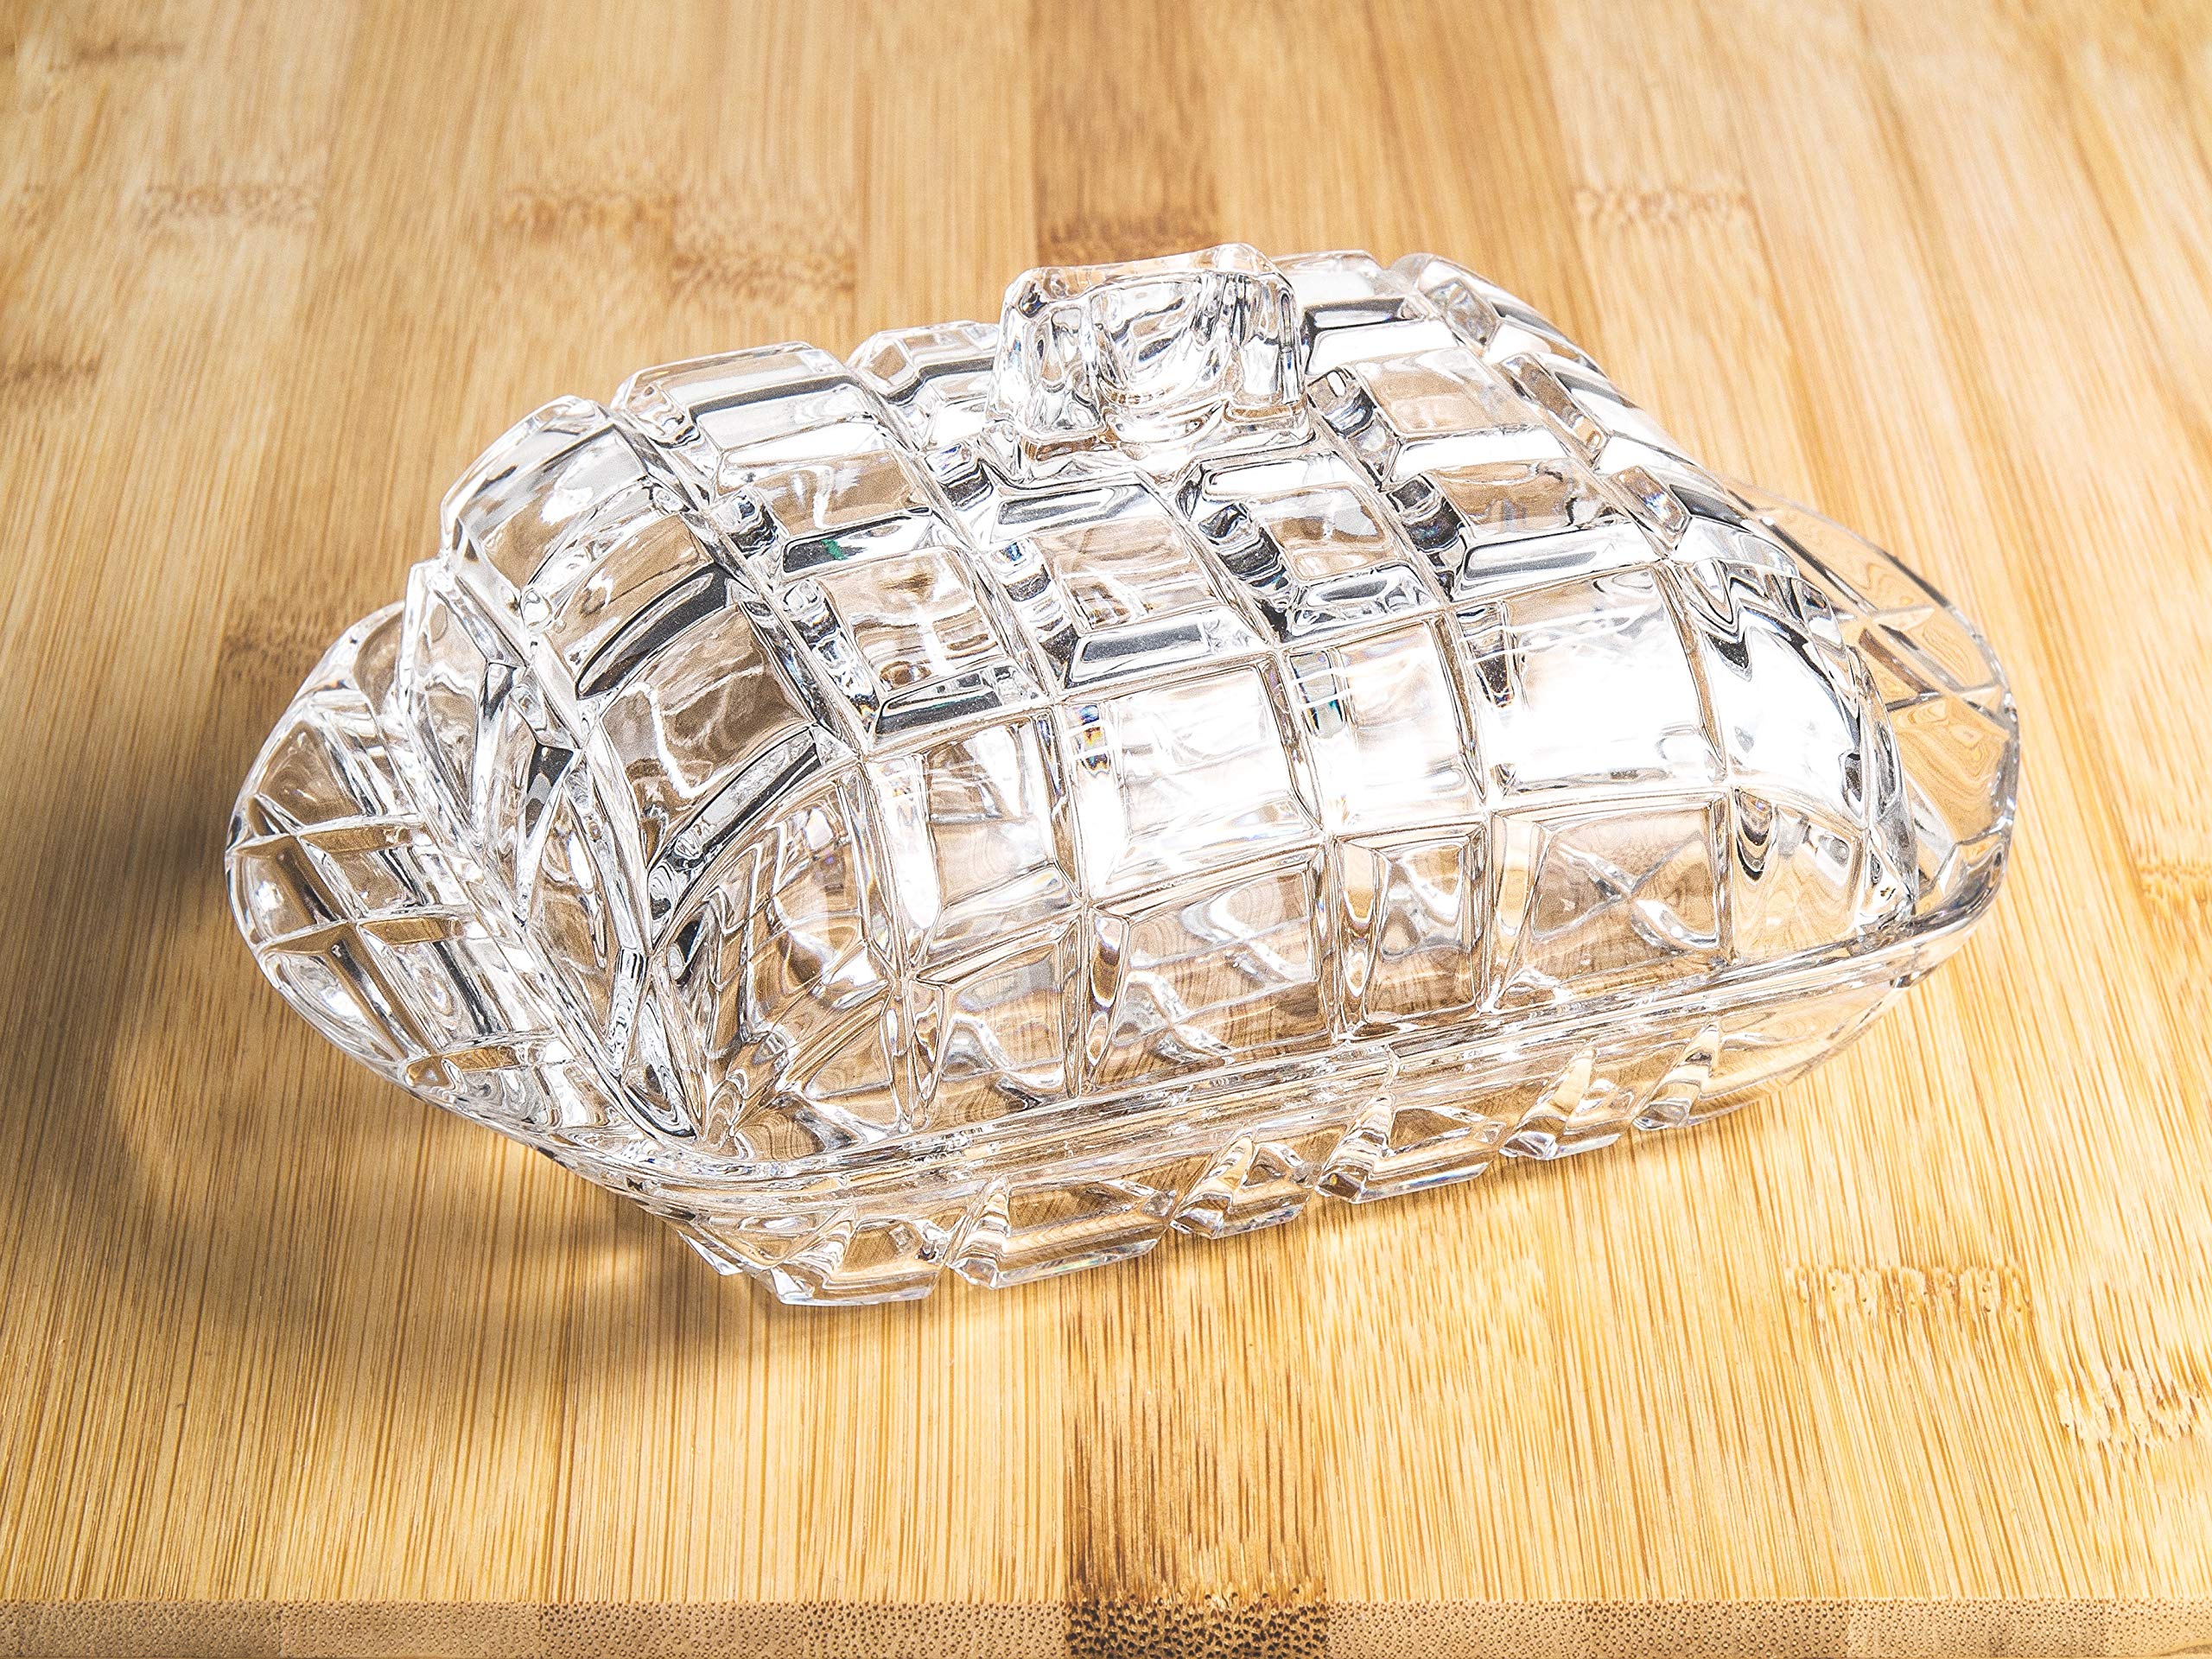 Butter Dish - Cheese Dish - Covered - Cut Crystal Glass - Rectangular - 6.8" Length - Made in Europe - by Barski